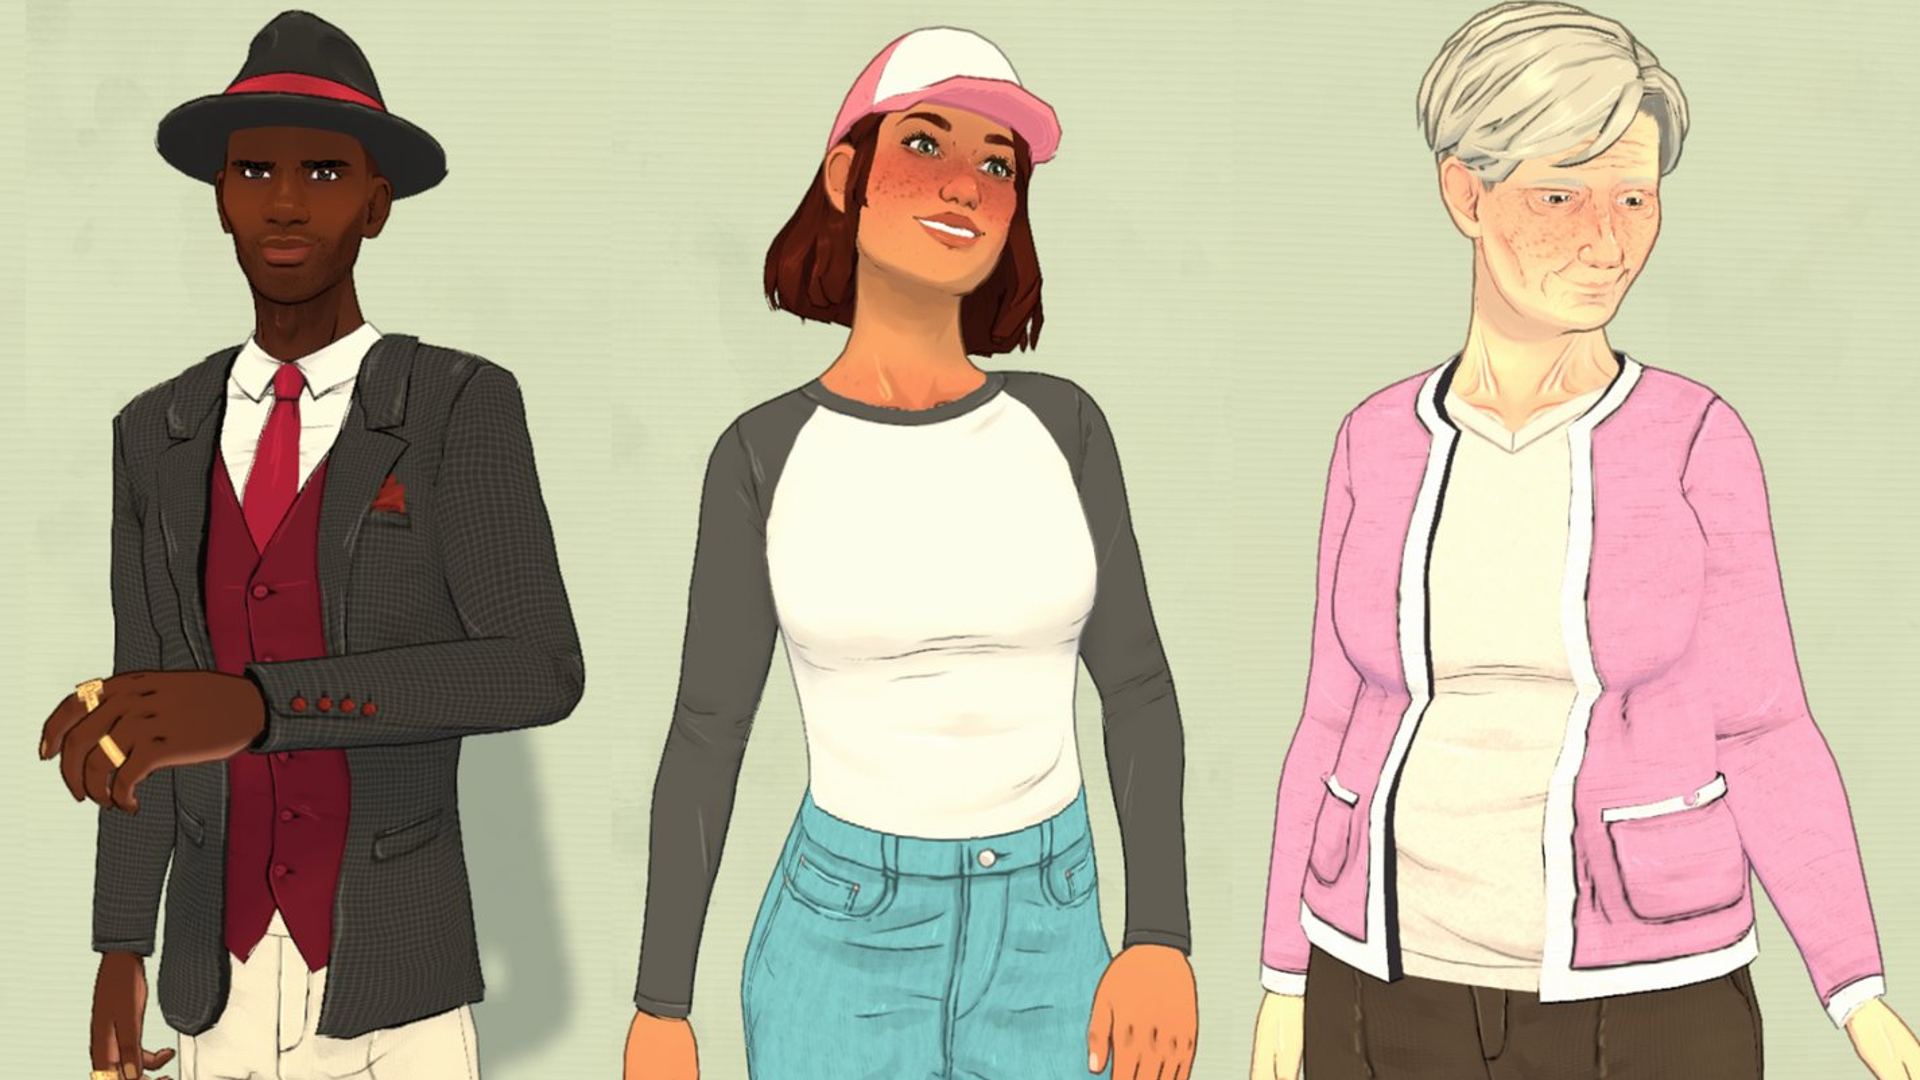 A male Paralives character wearing a black and red three piece suit beside two female characters, one young one in a white shirt and cap, one elderly in a pink coat and white shirt